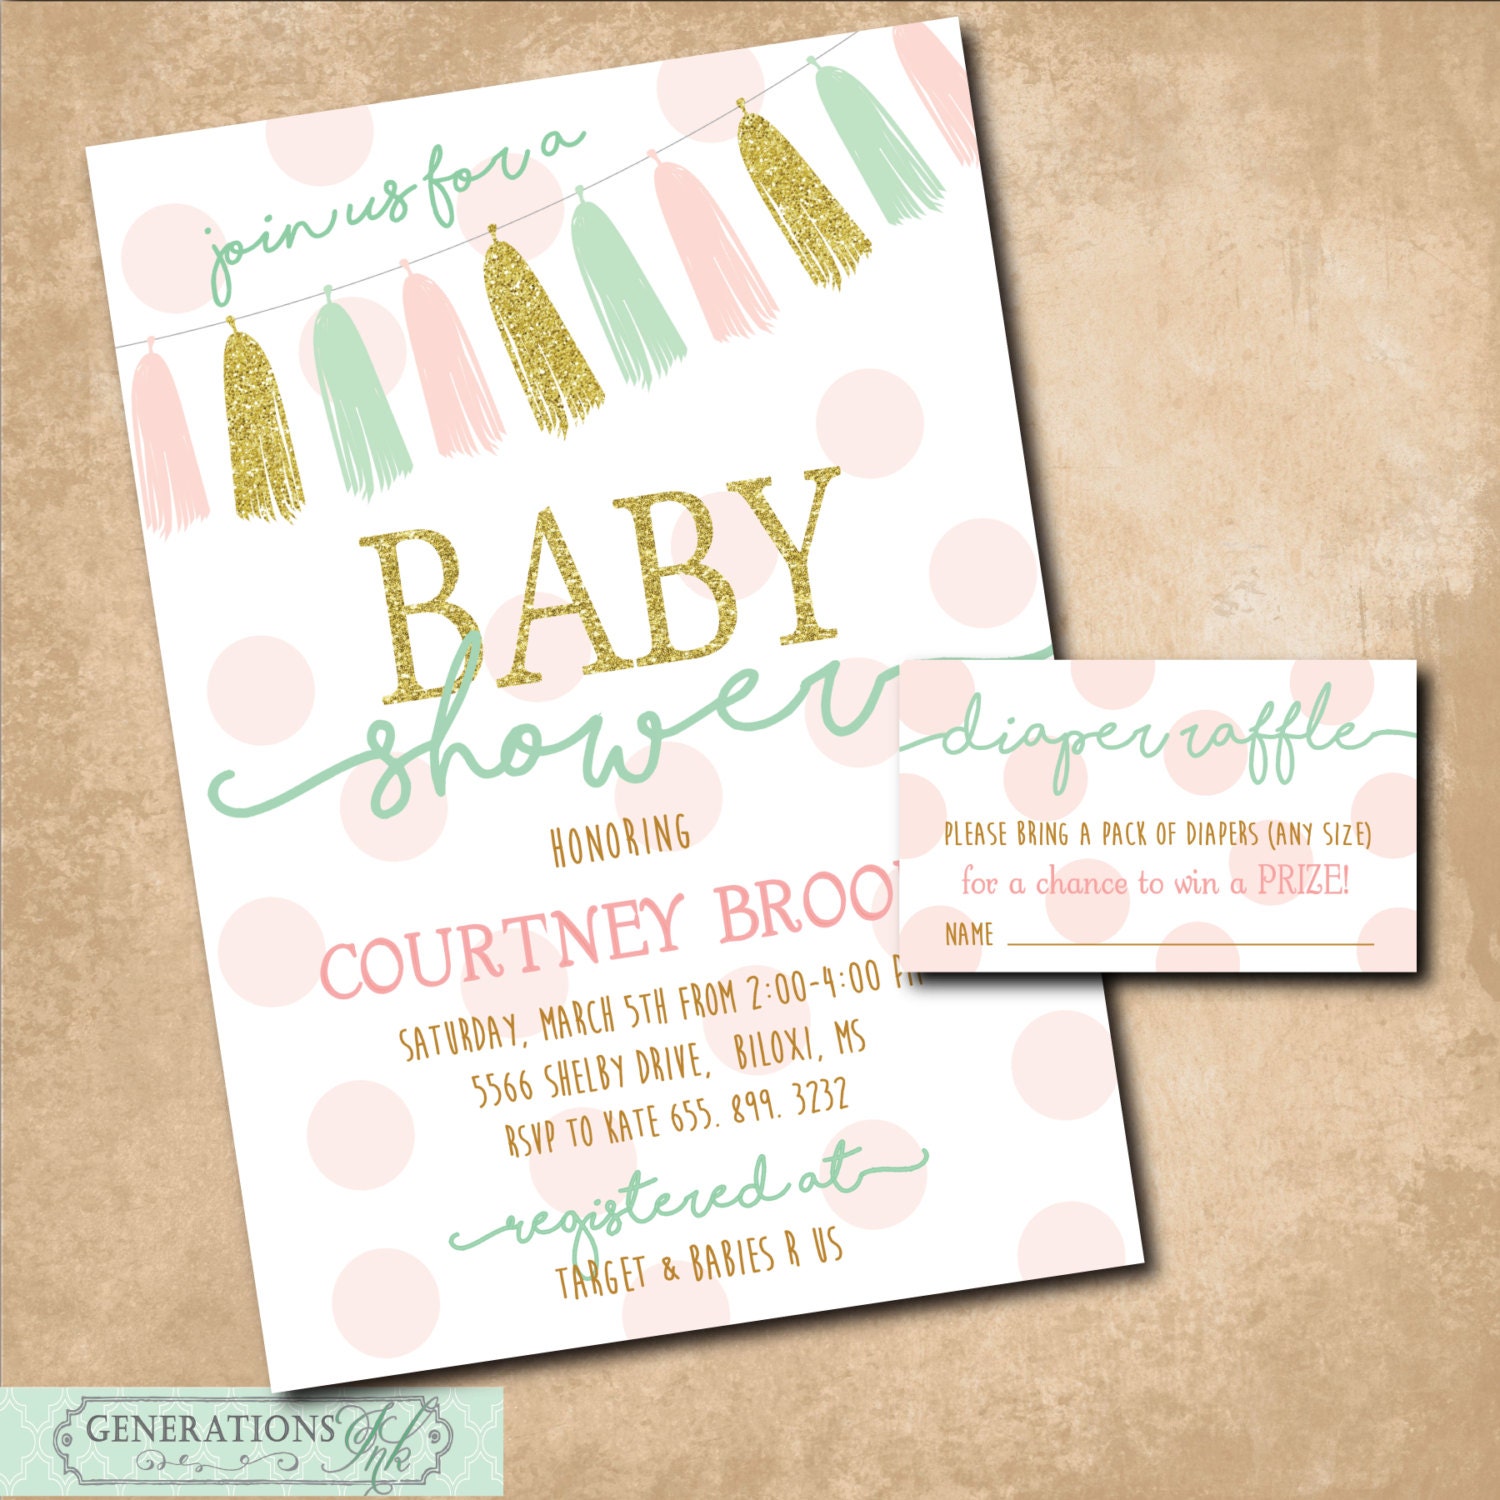 Baby Shower Invitations With Diaper Raffle Wording 7